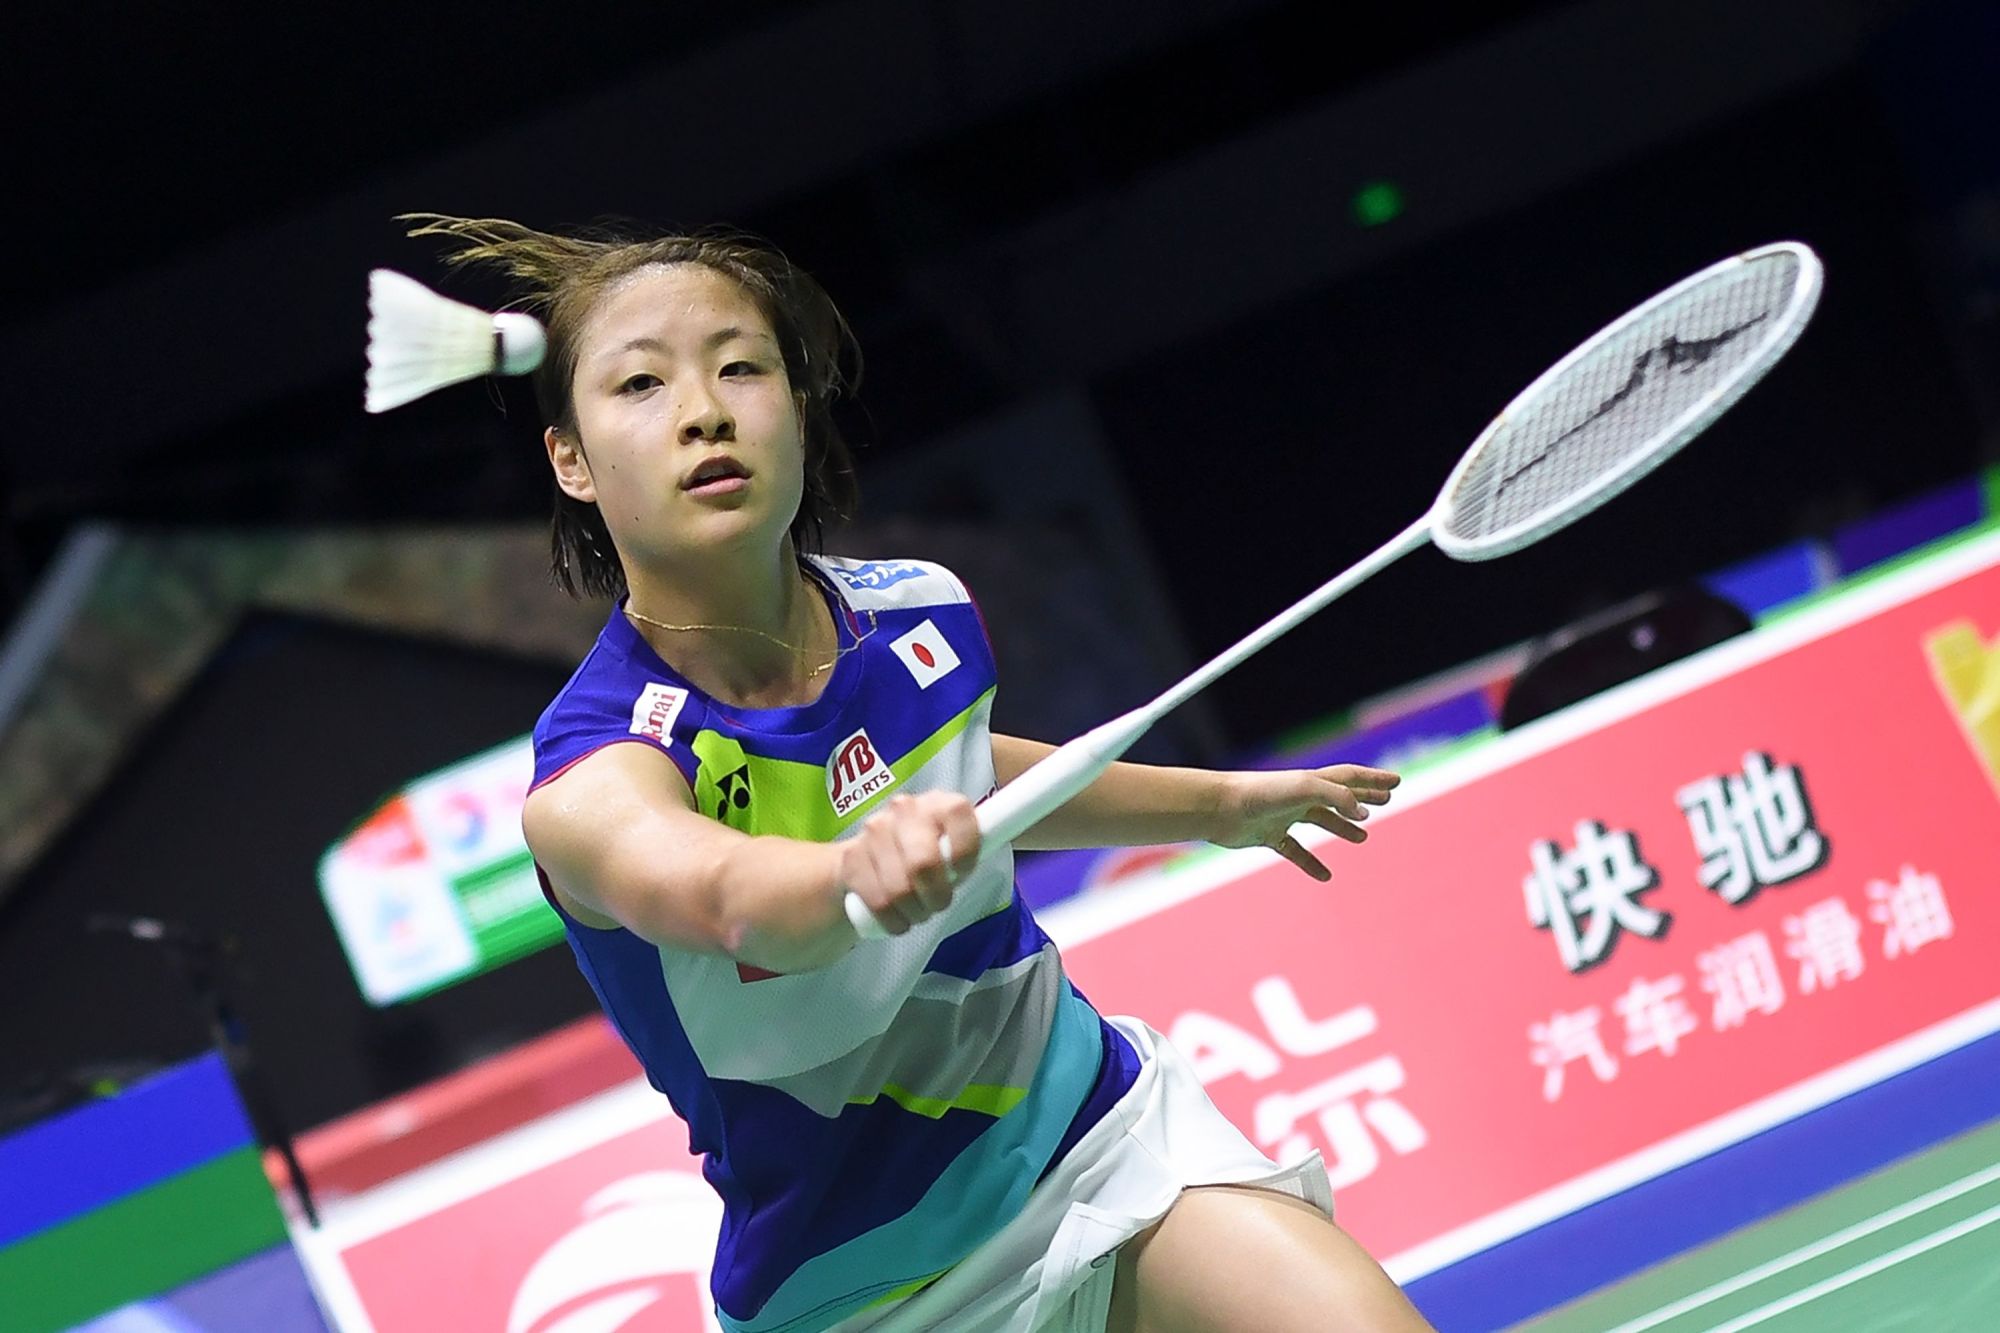 Nozomi Okuhara rescues Japan from early exit at mixed-team world championships